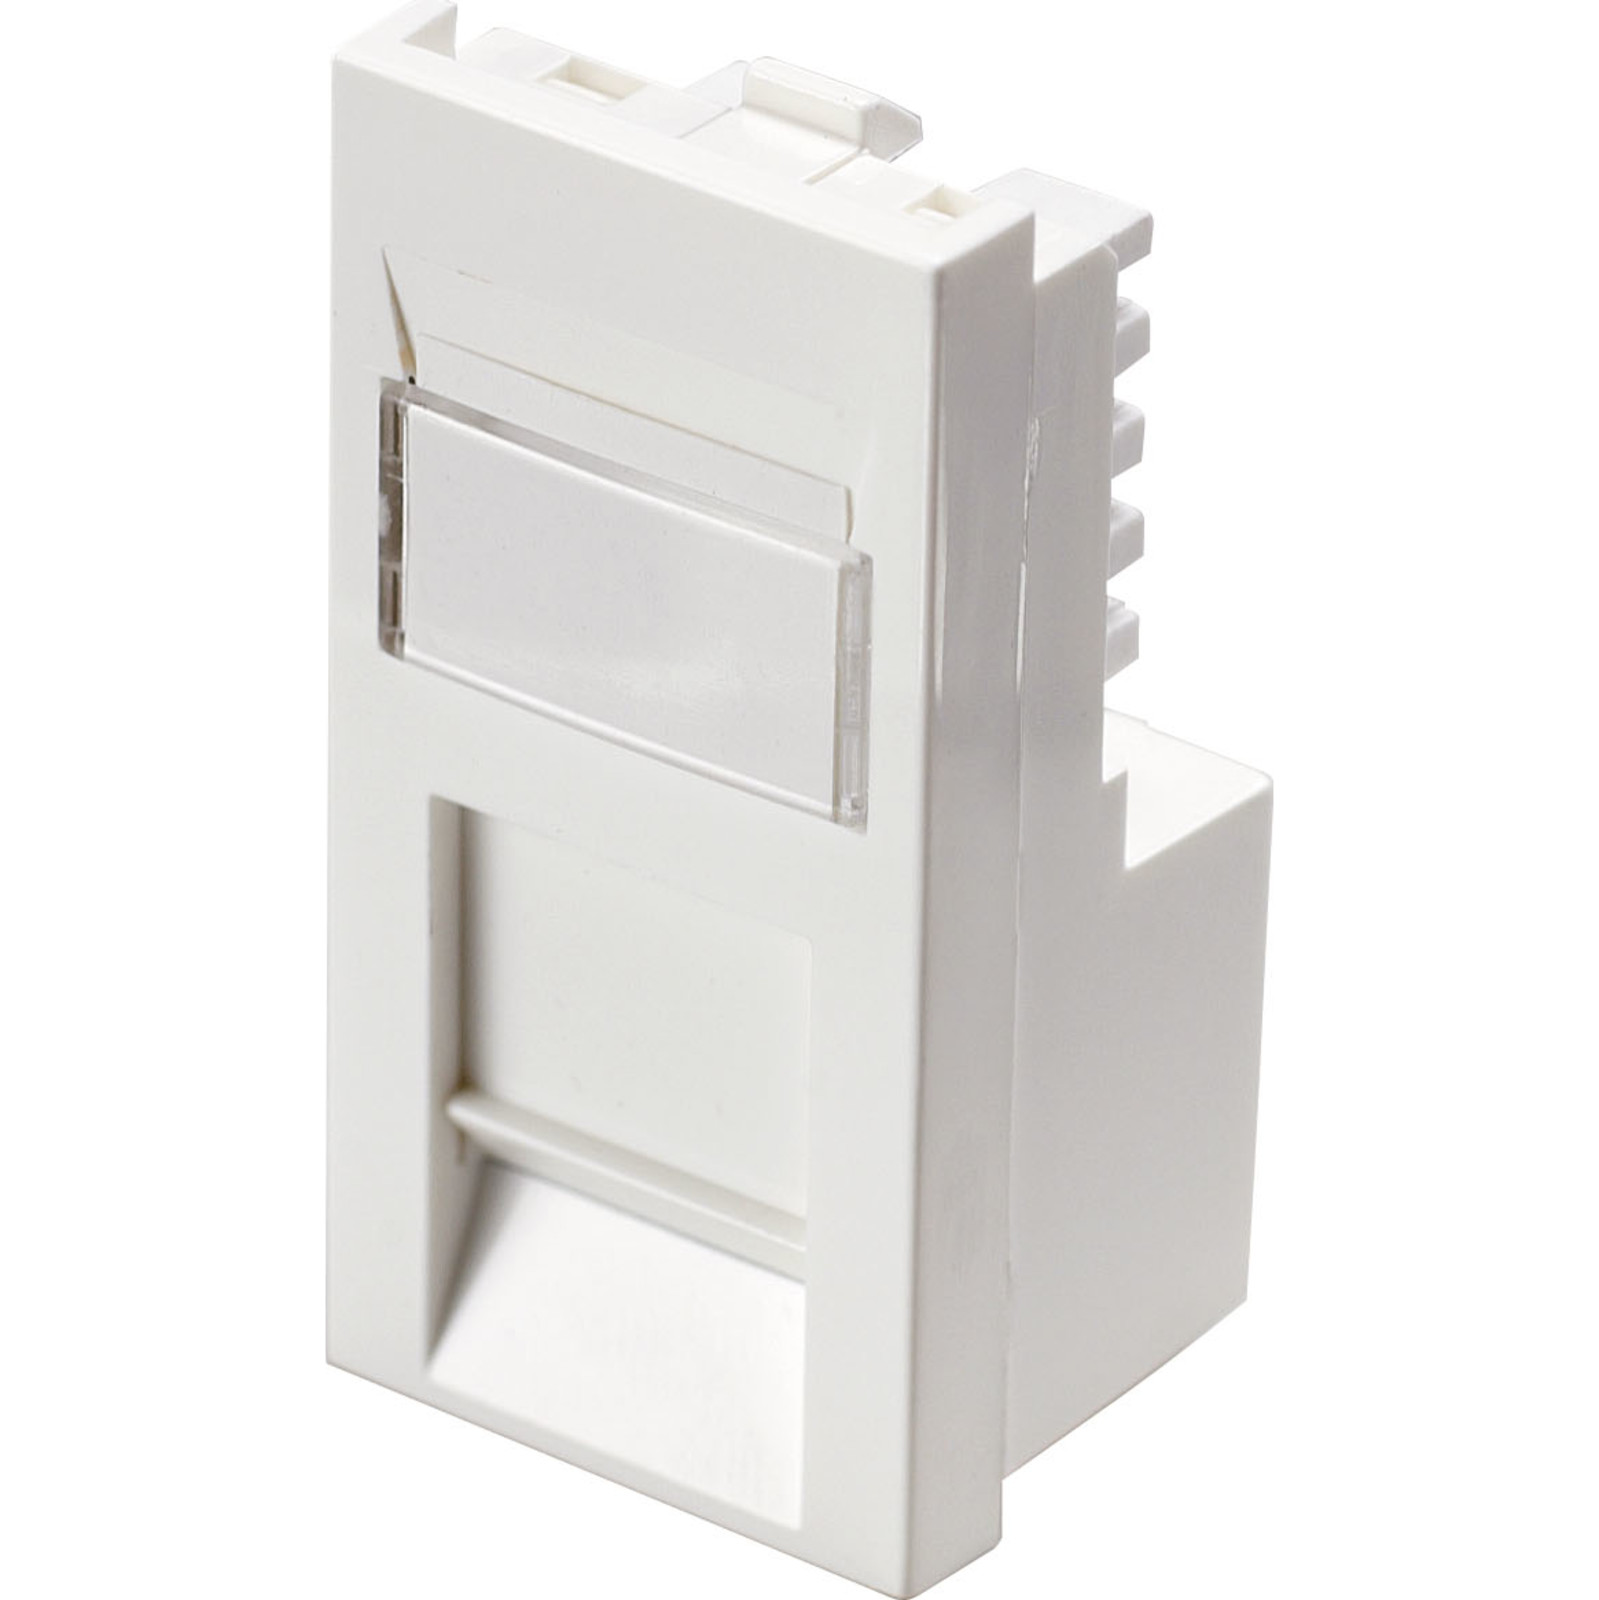 Excel Category 5e (UTP)Office Unscreened Low Profile Euromod RJ45 Module - White